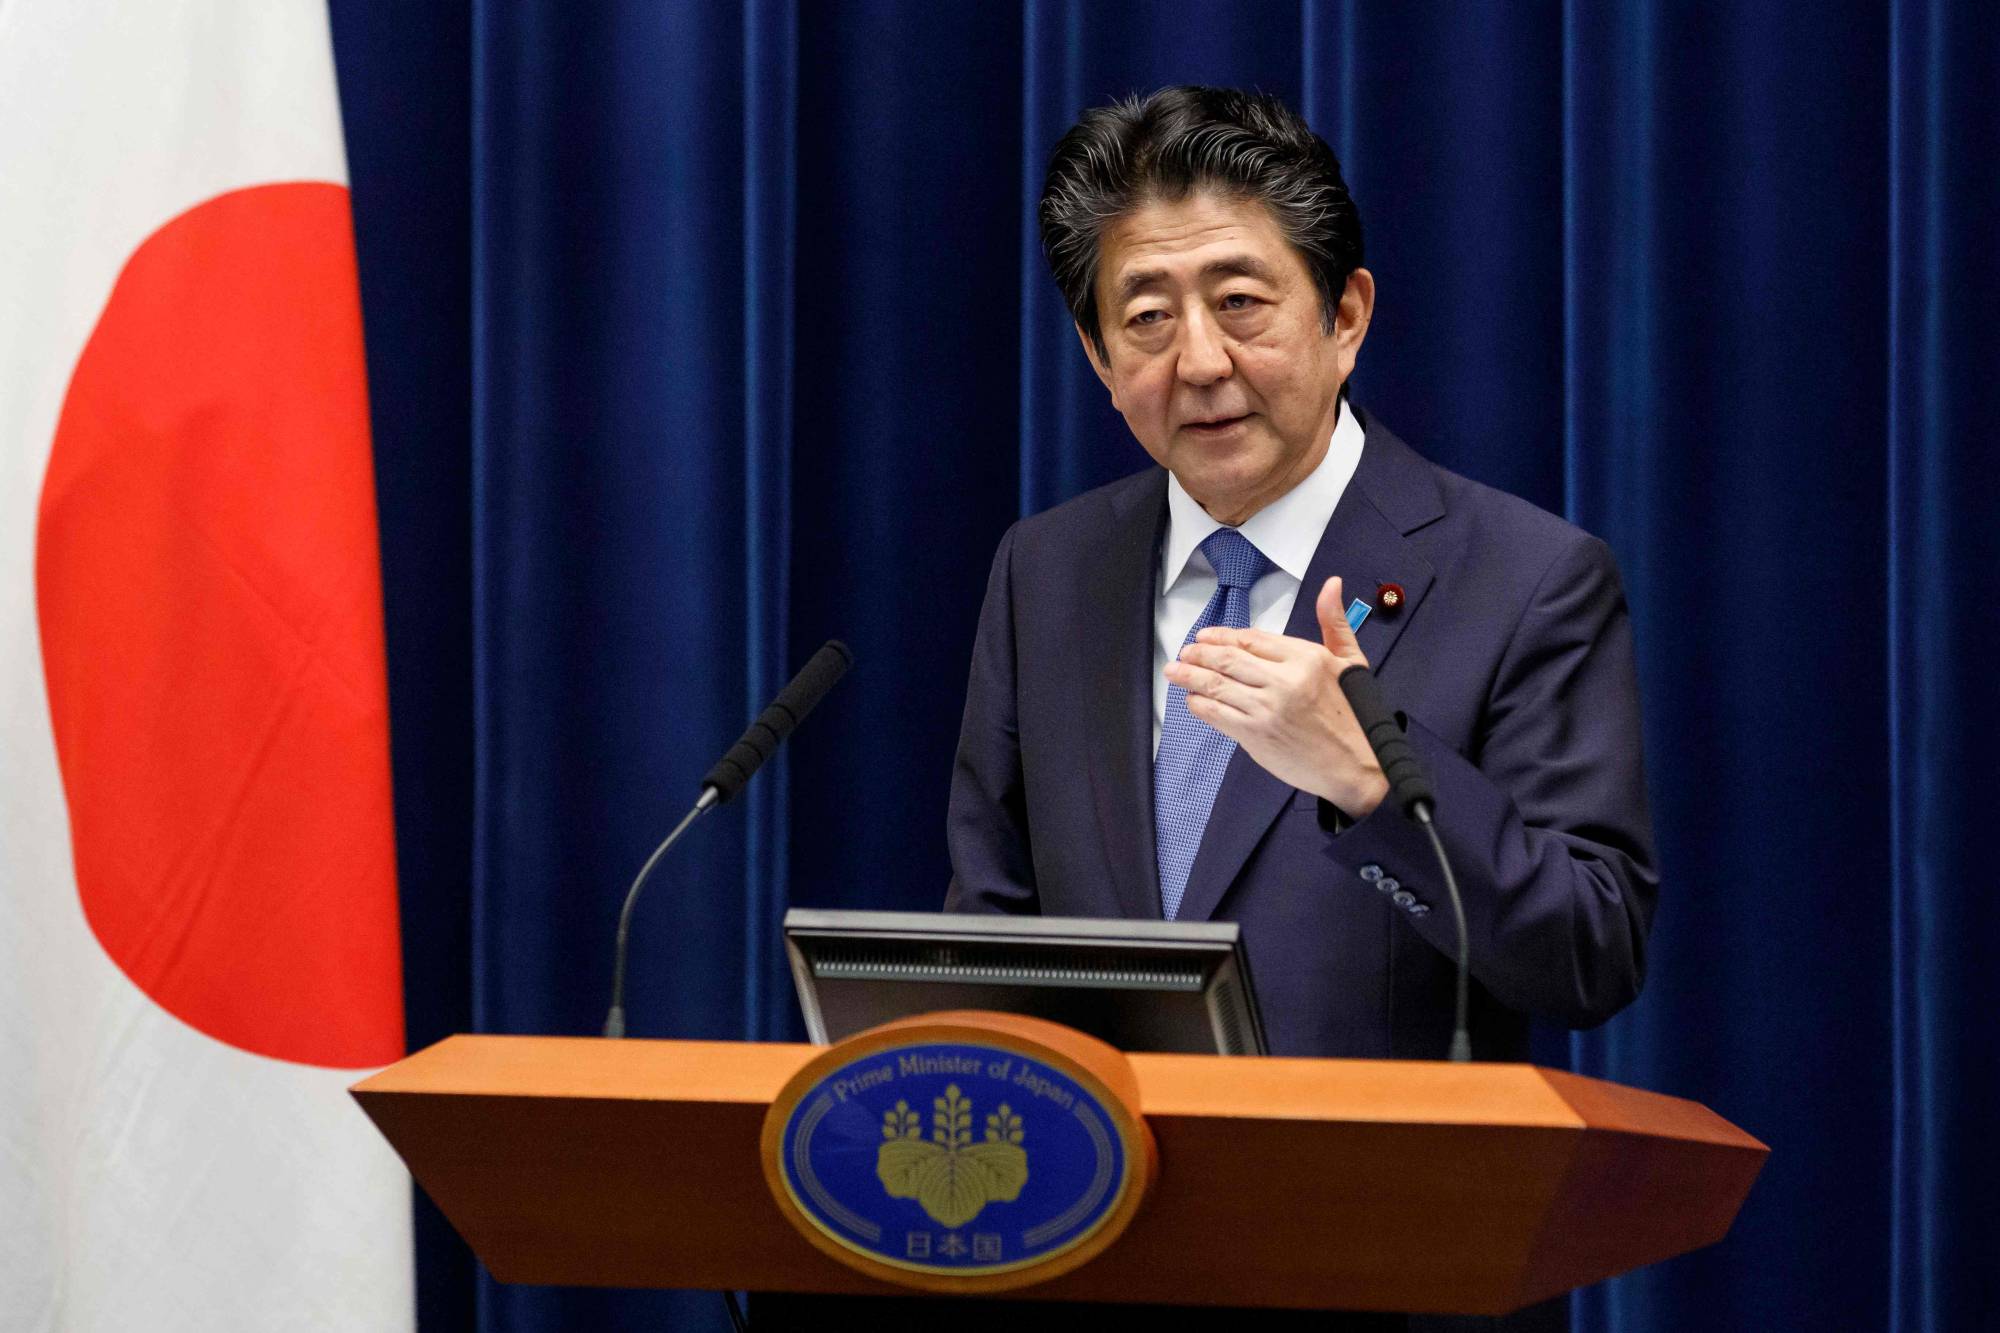 Under Prime Minister Shinzo Abe’s leadership, Japan has opened up on the global stage and turned into a trustworthy, proactive alliance builder. | AFP-JIJI